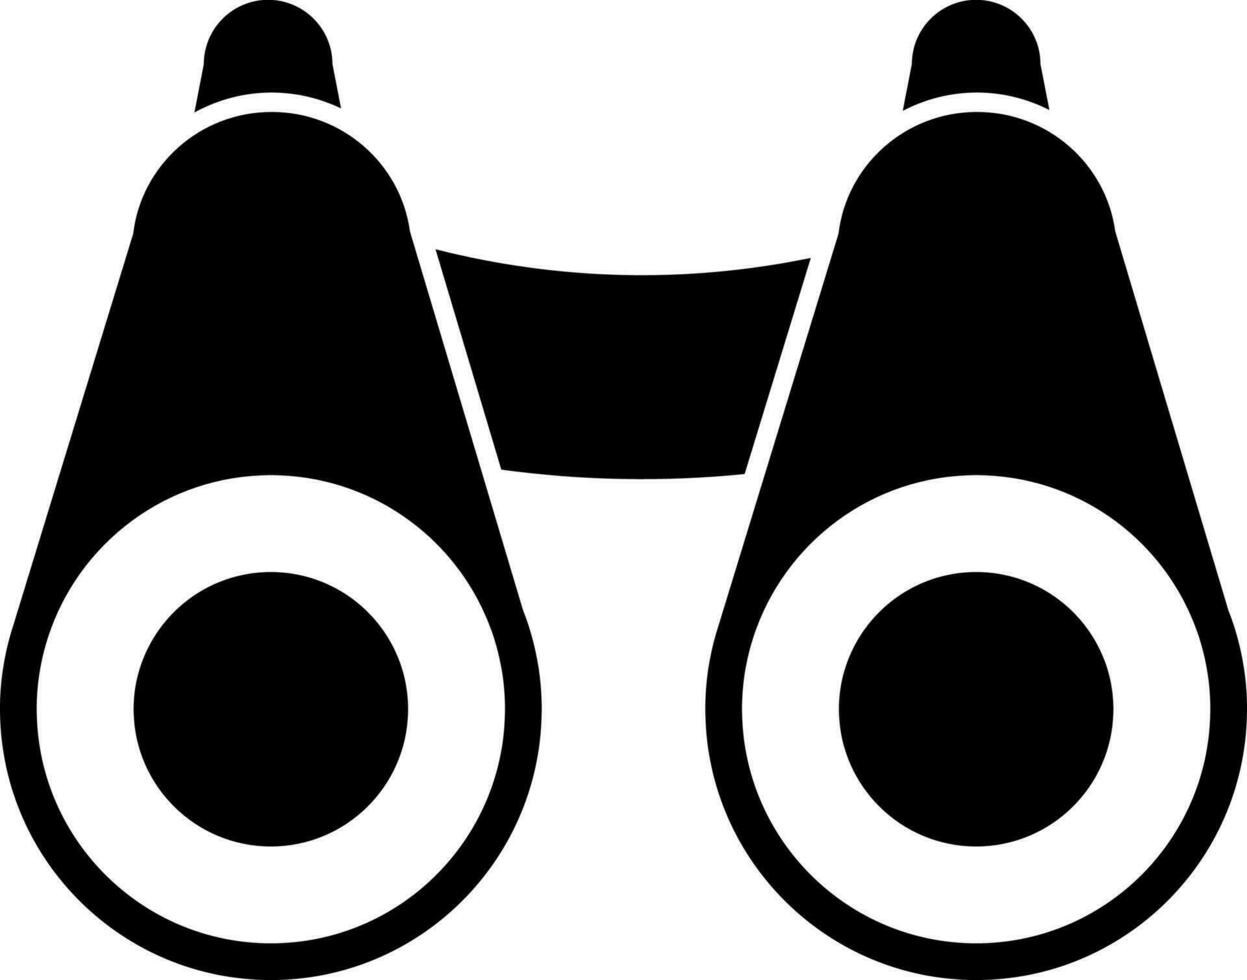 Black and White binocular icon in flat style. vector